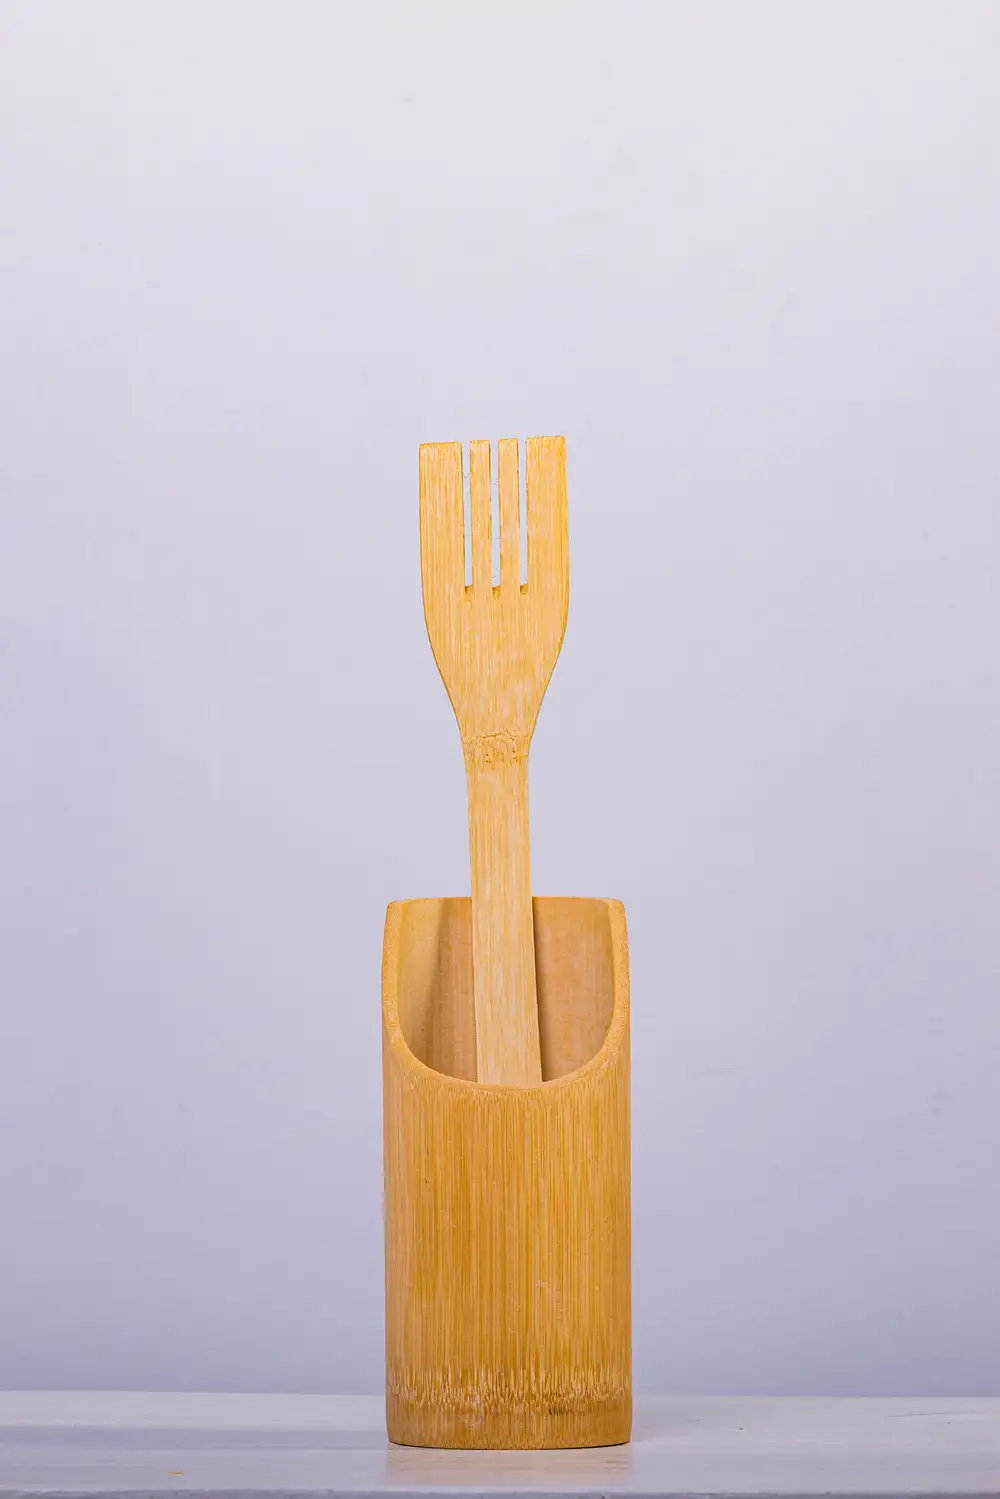 Wooden spatula placed in the container